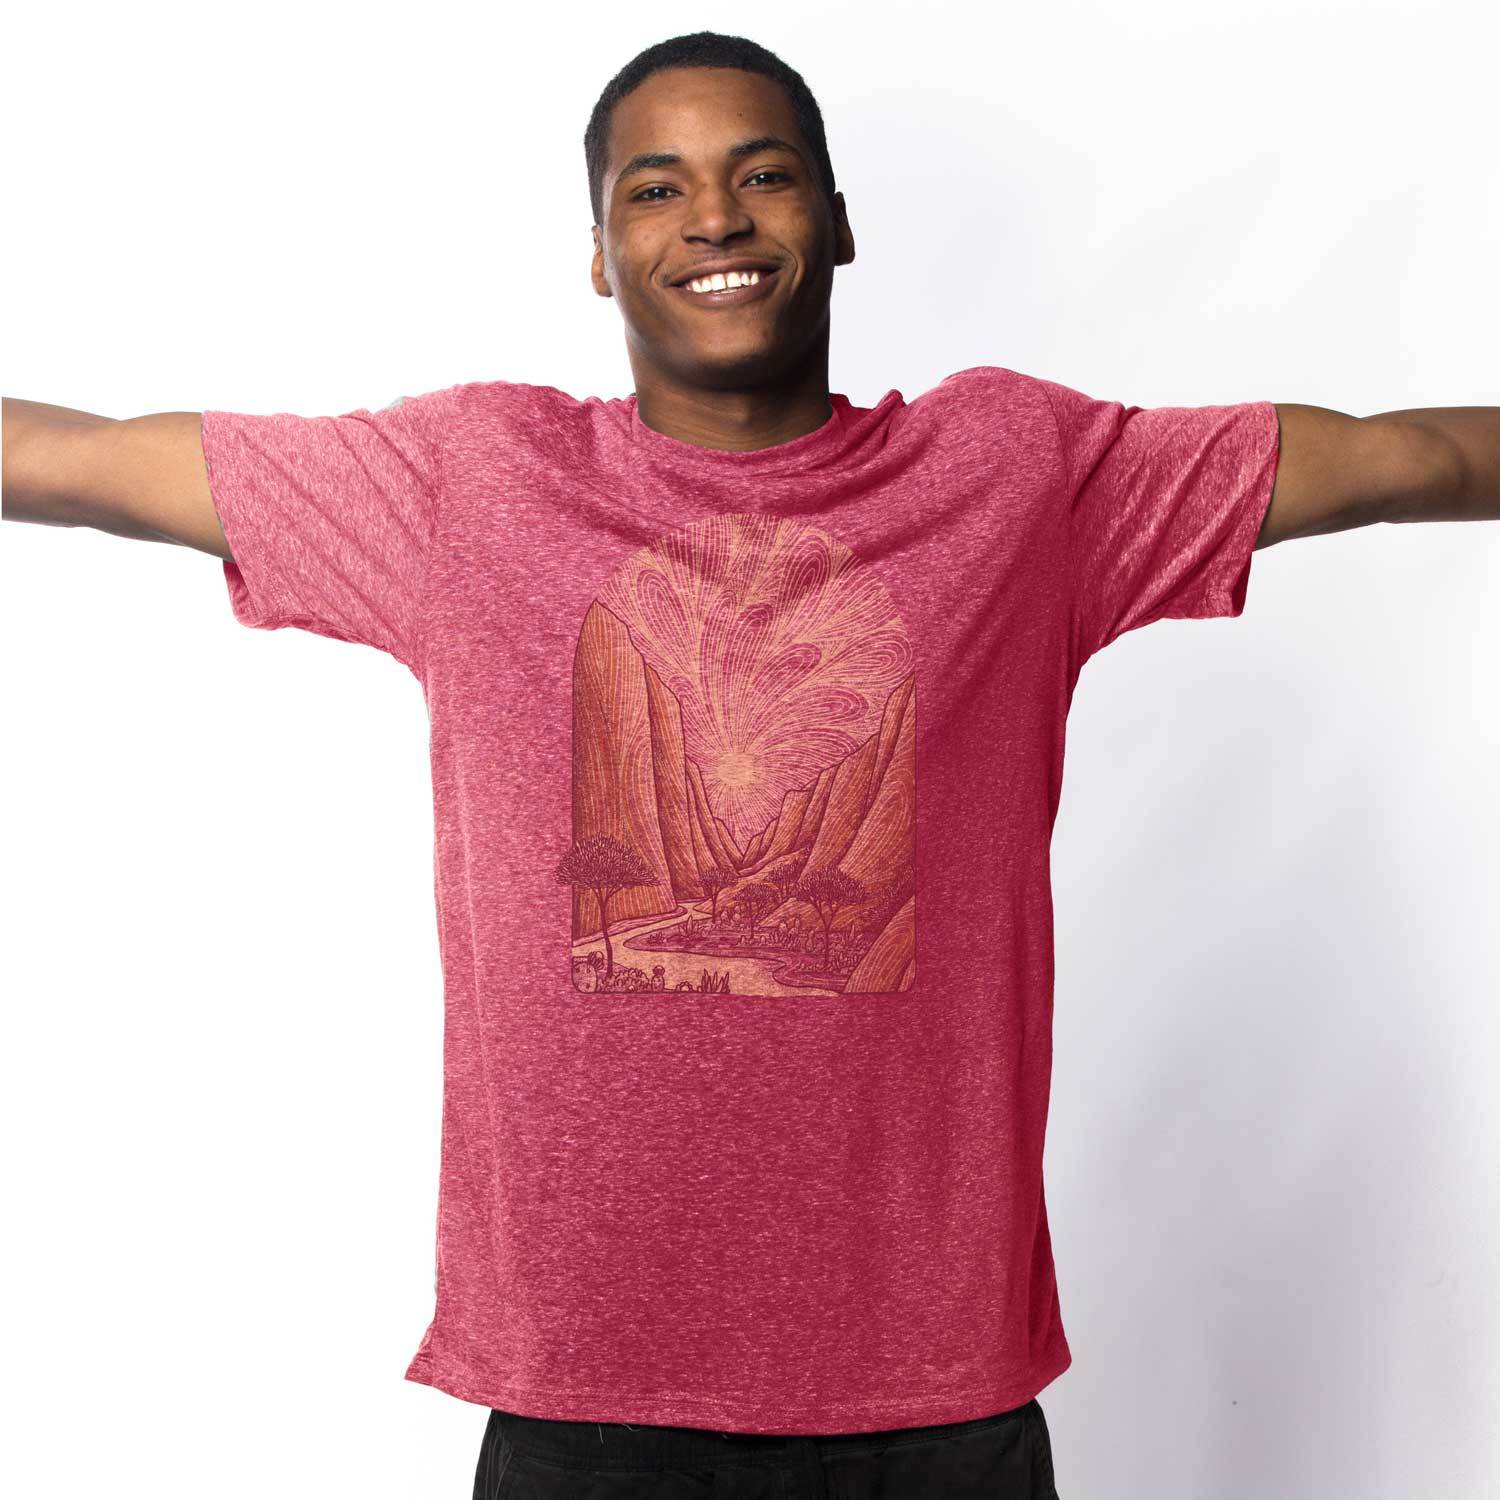 Men's Zion Vintage Inspired T-Shirt | Retro National Park Graphic Tee | Solid Threads